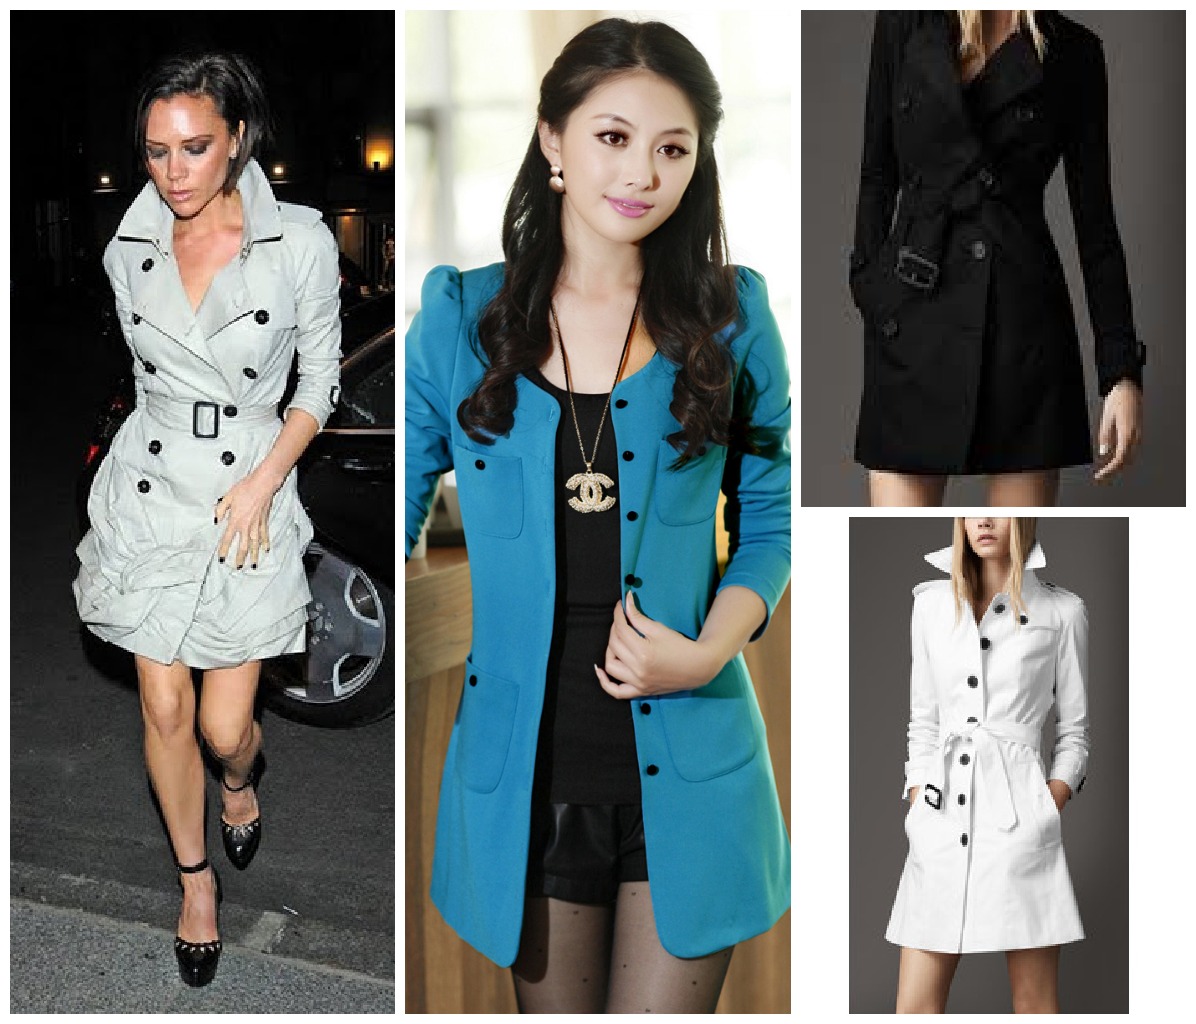 How To Dress Petite: Can Petite Girls Wear a Mid-Length Coat